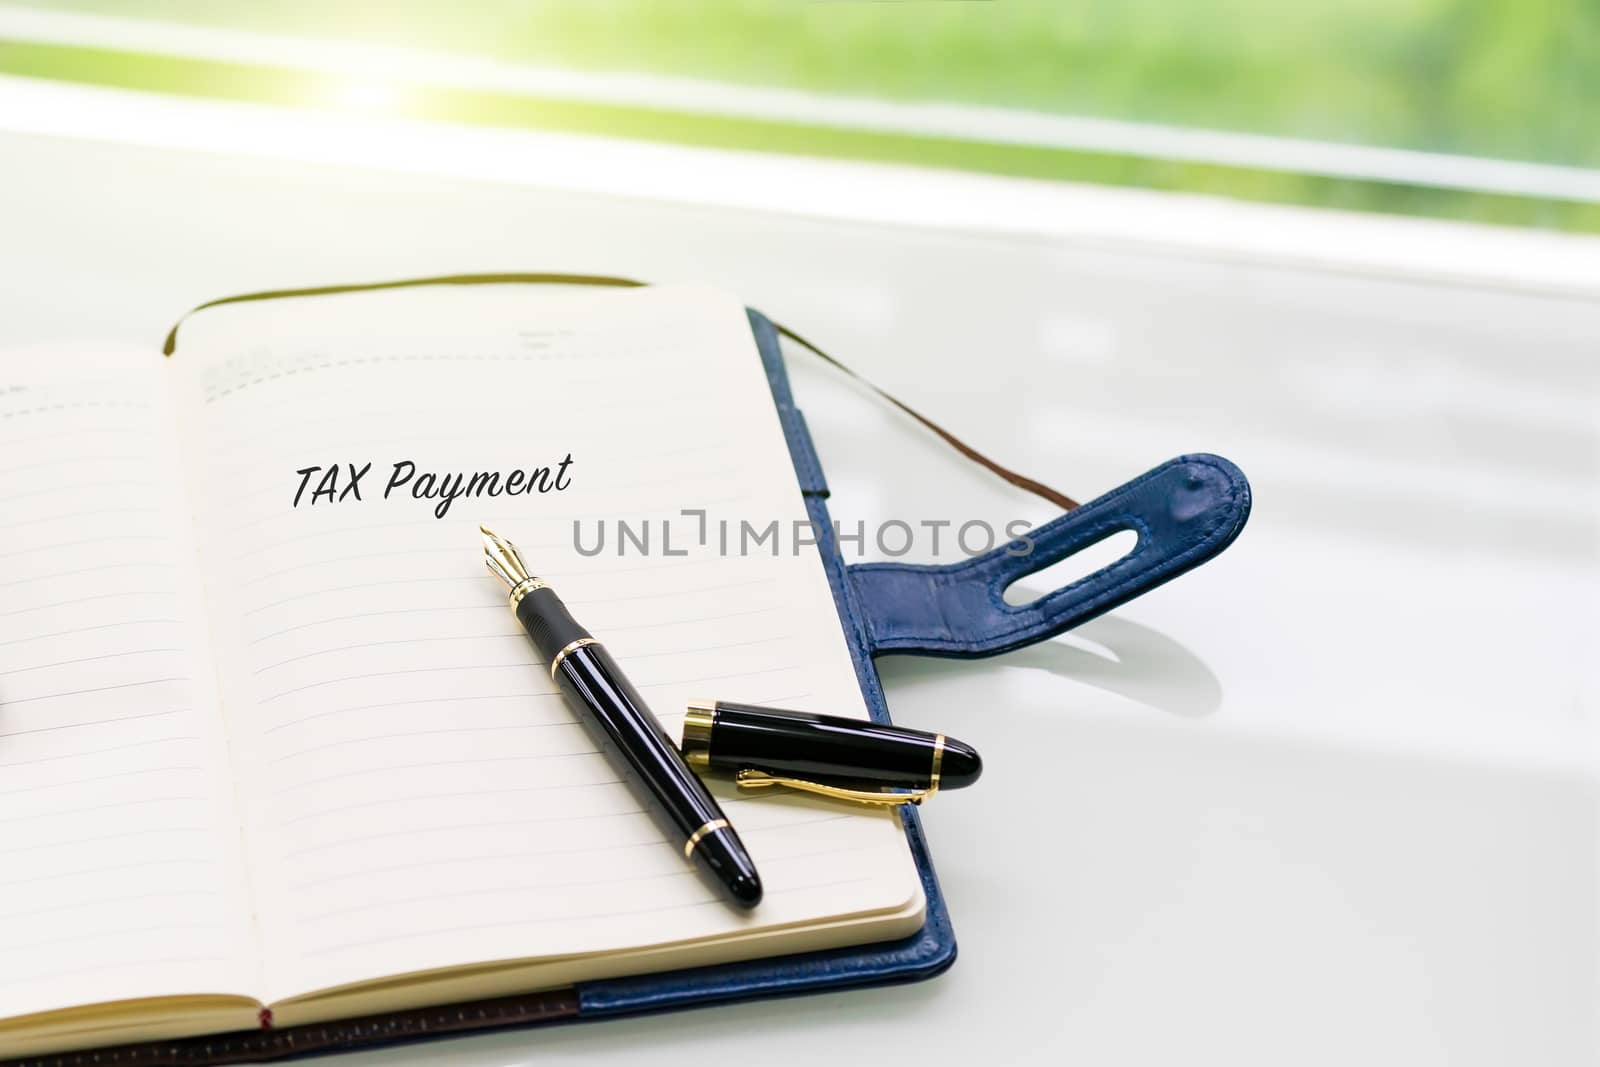 pen and notebook with TAX Payment word on the white table near window, sideview with green light backgrounds